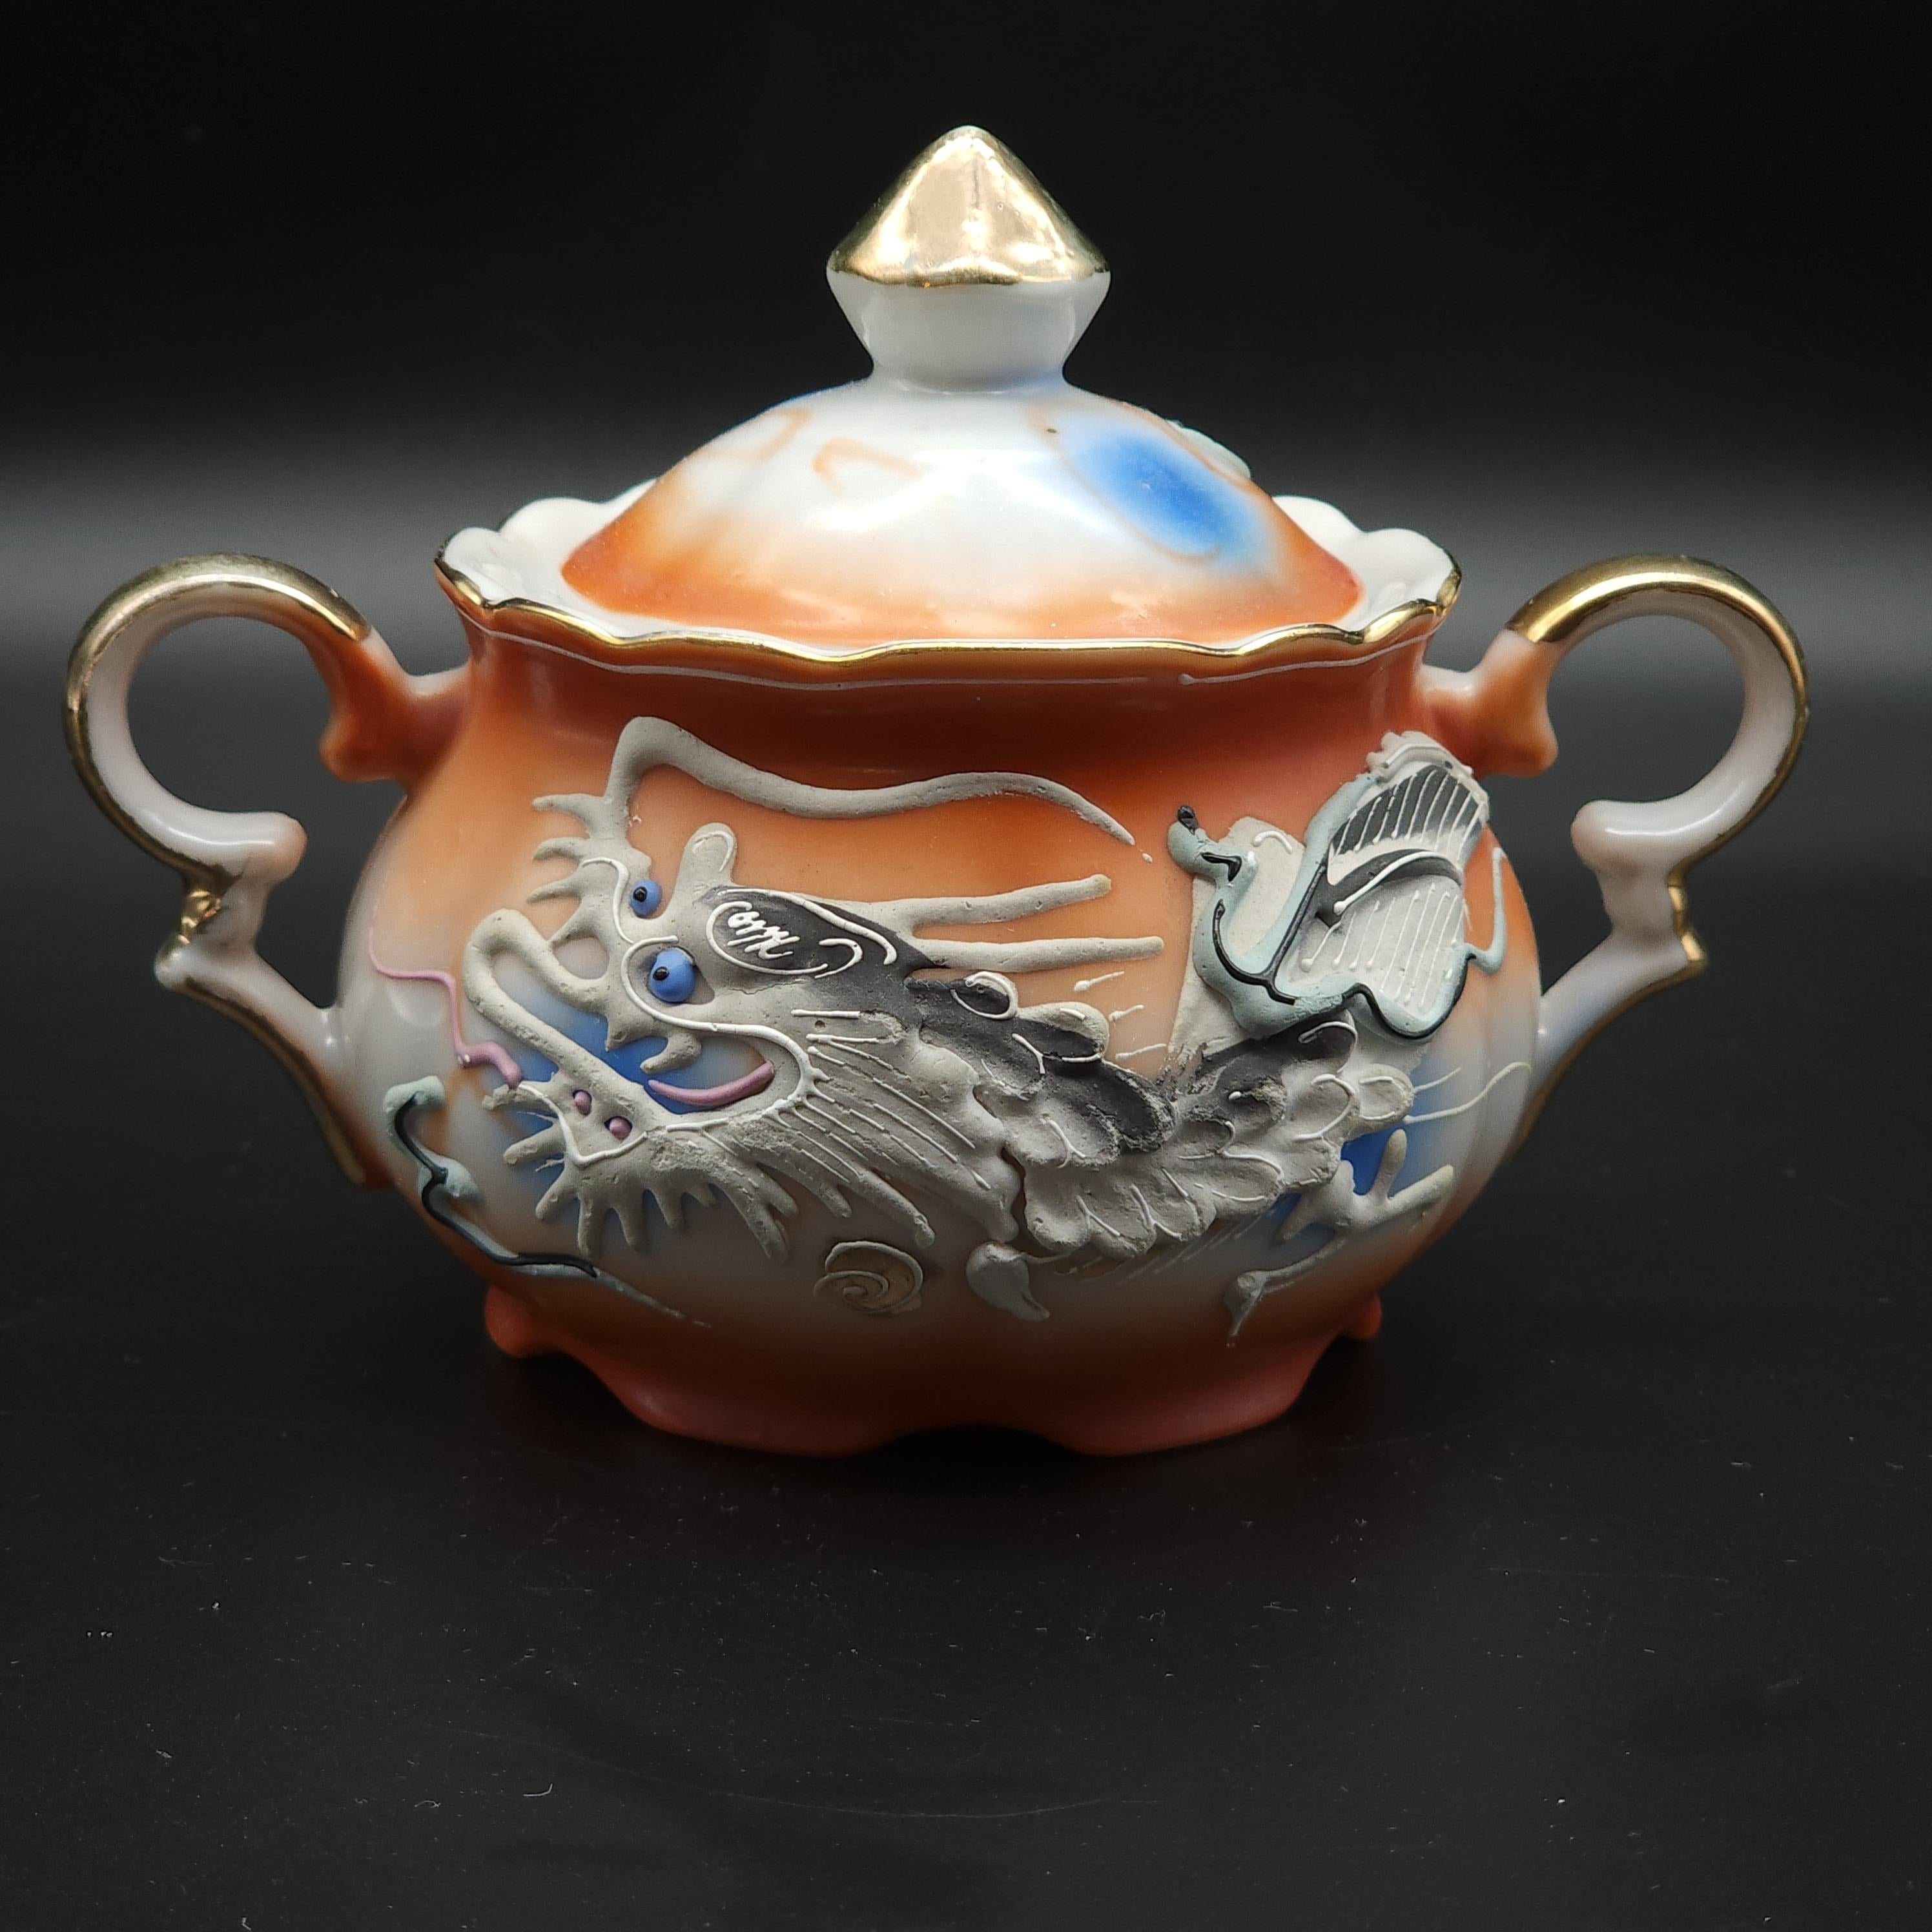 A beautiful artisanal handcrafted porcelain Dragon ware coffee set of 14 items. This set features a moriage dragon design. Eyes are decorated with deep blue glass beads. Hand painted in a rich red-orange color and gilded with 22K gold.

Cup Height: